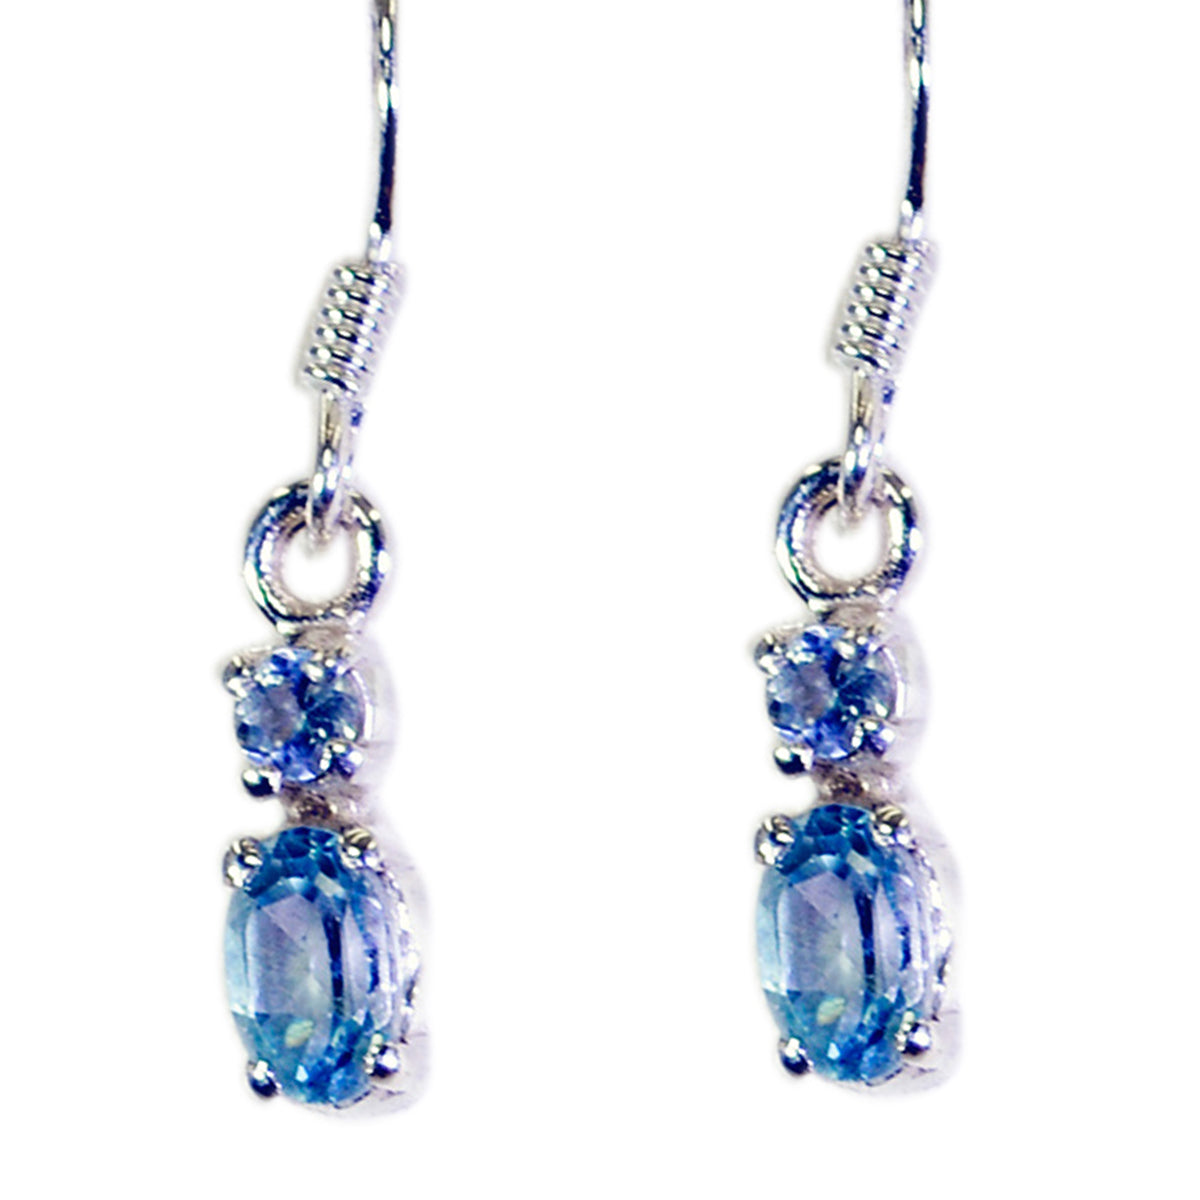 Riyo Genuine Gems multi shape Faceted Blue Topaz Silver Earrings gift for independence day